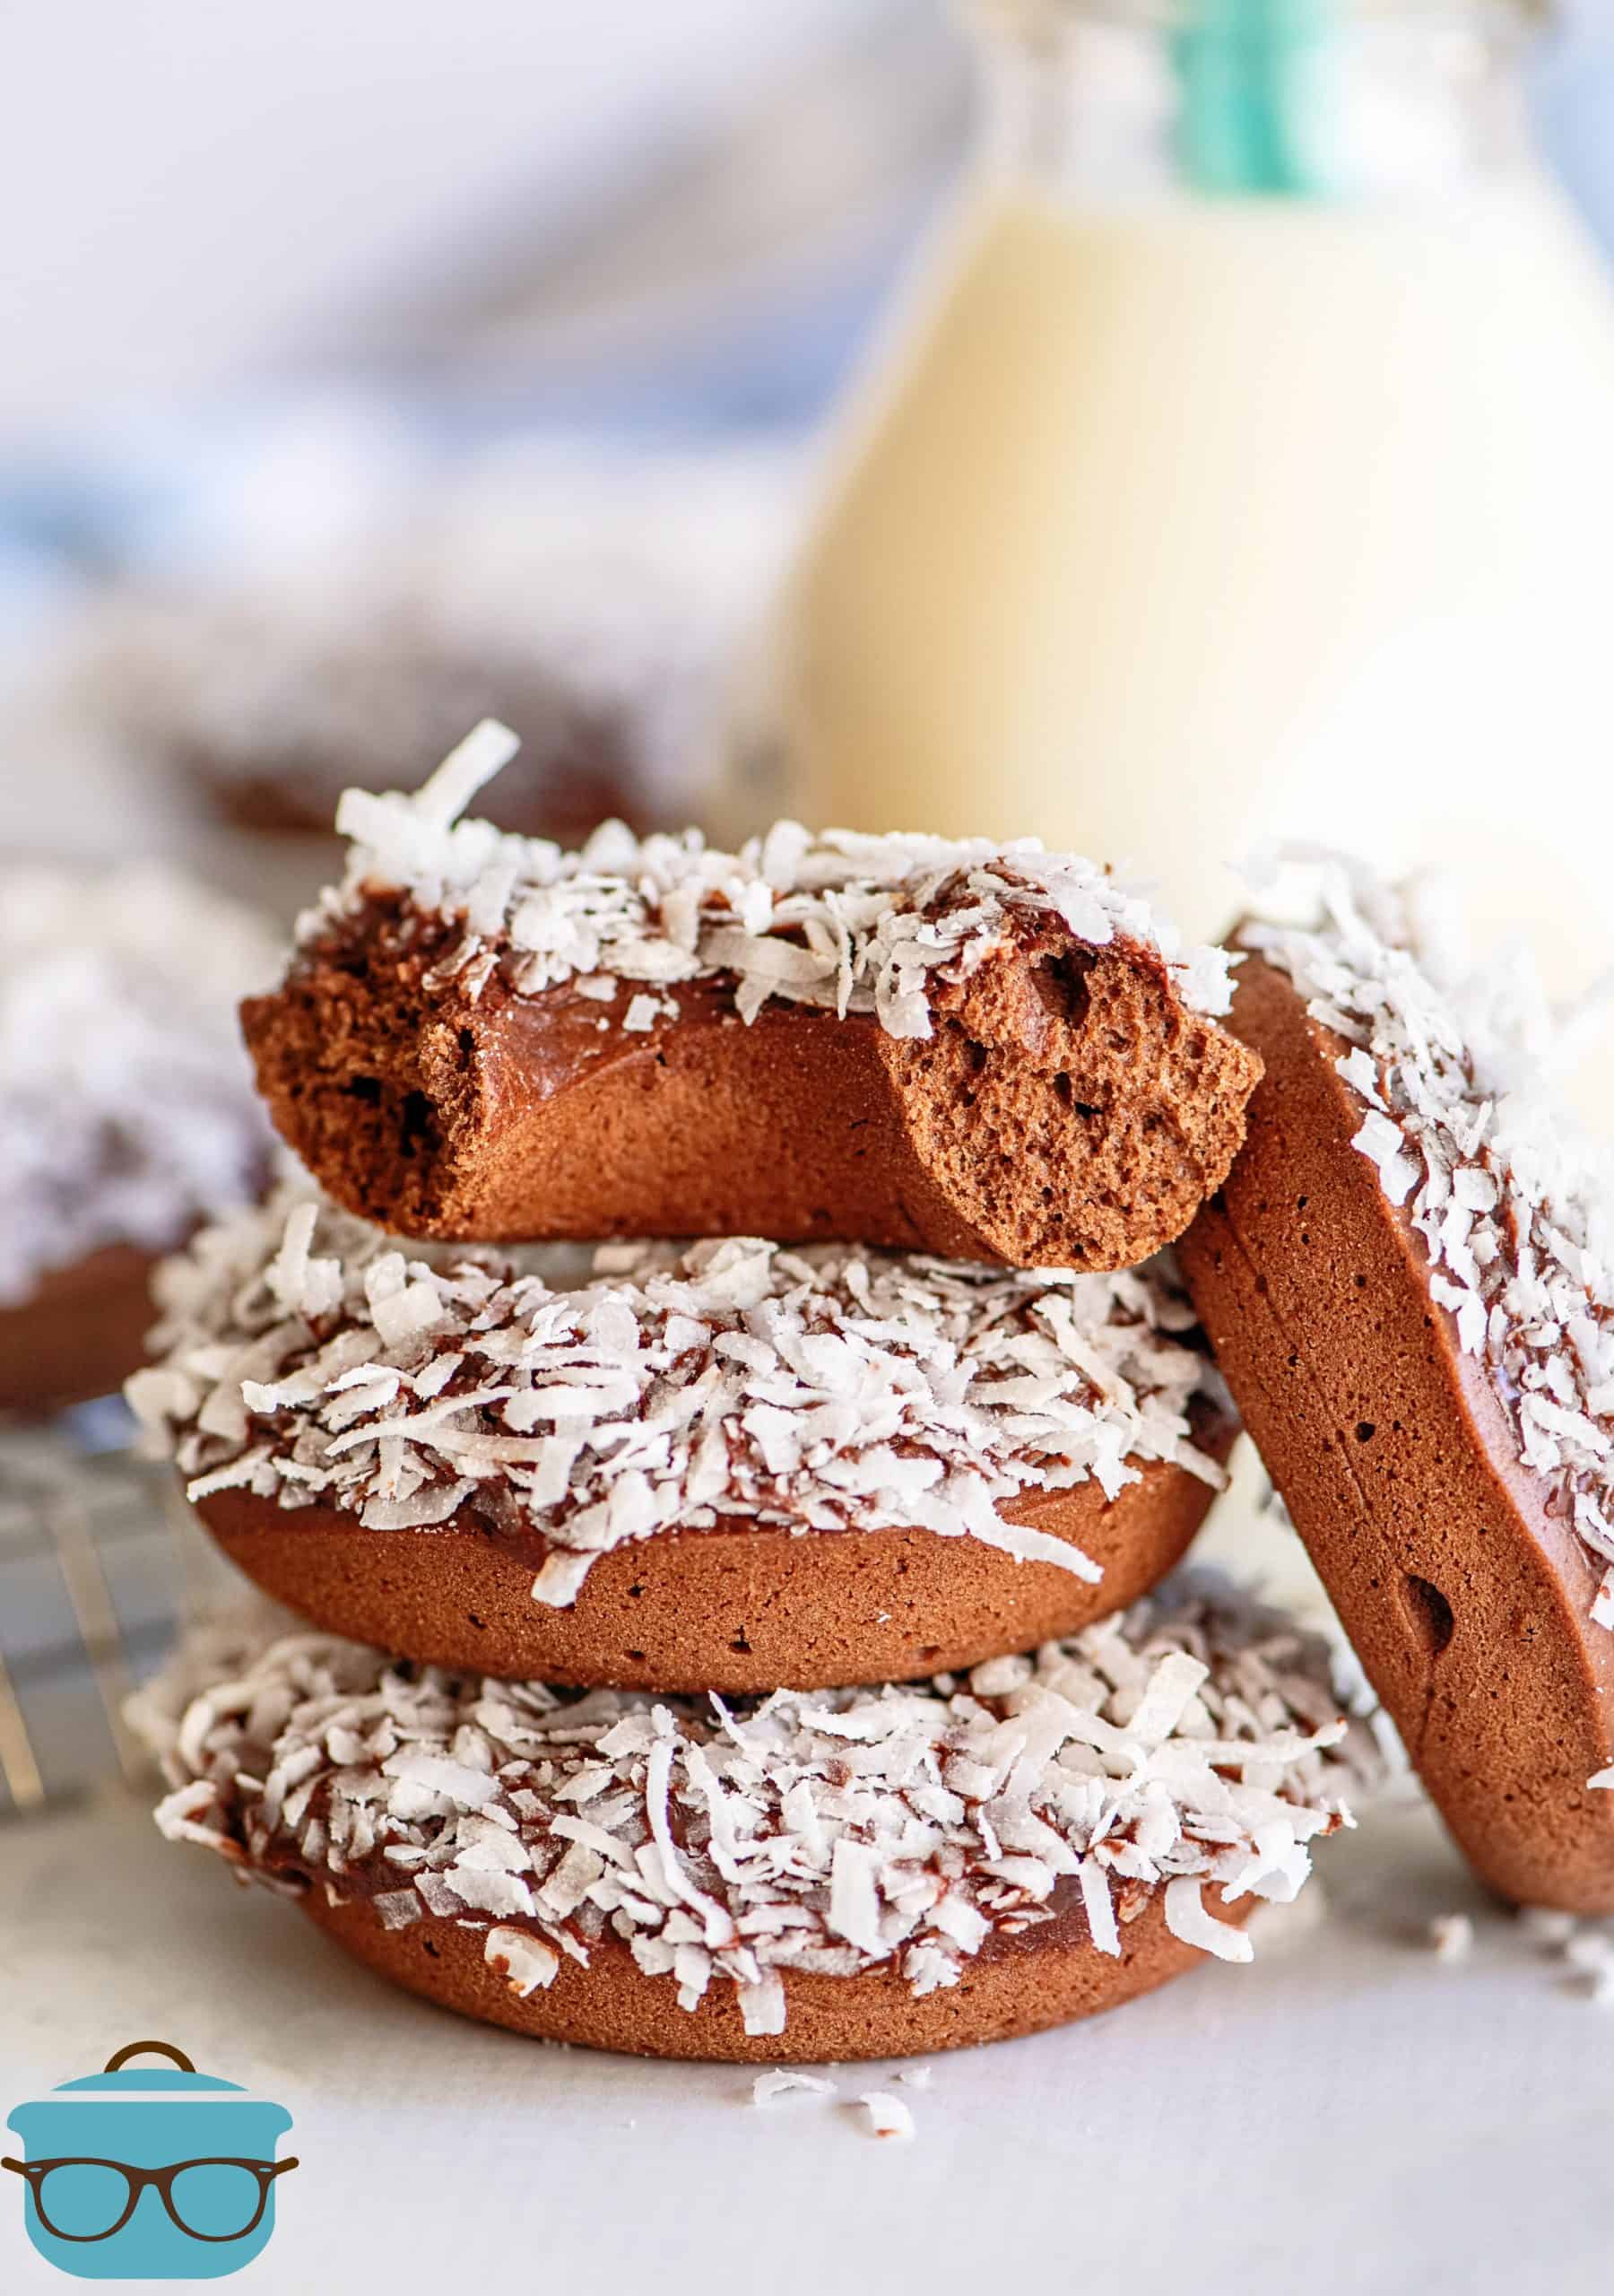 Stacked Chocolate Coconut Baked Donuts with one donut broken in half